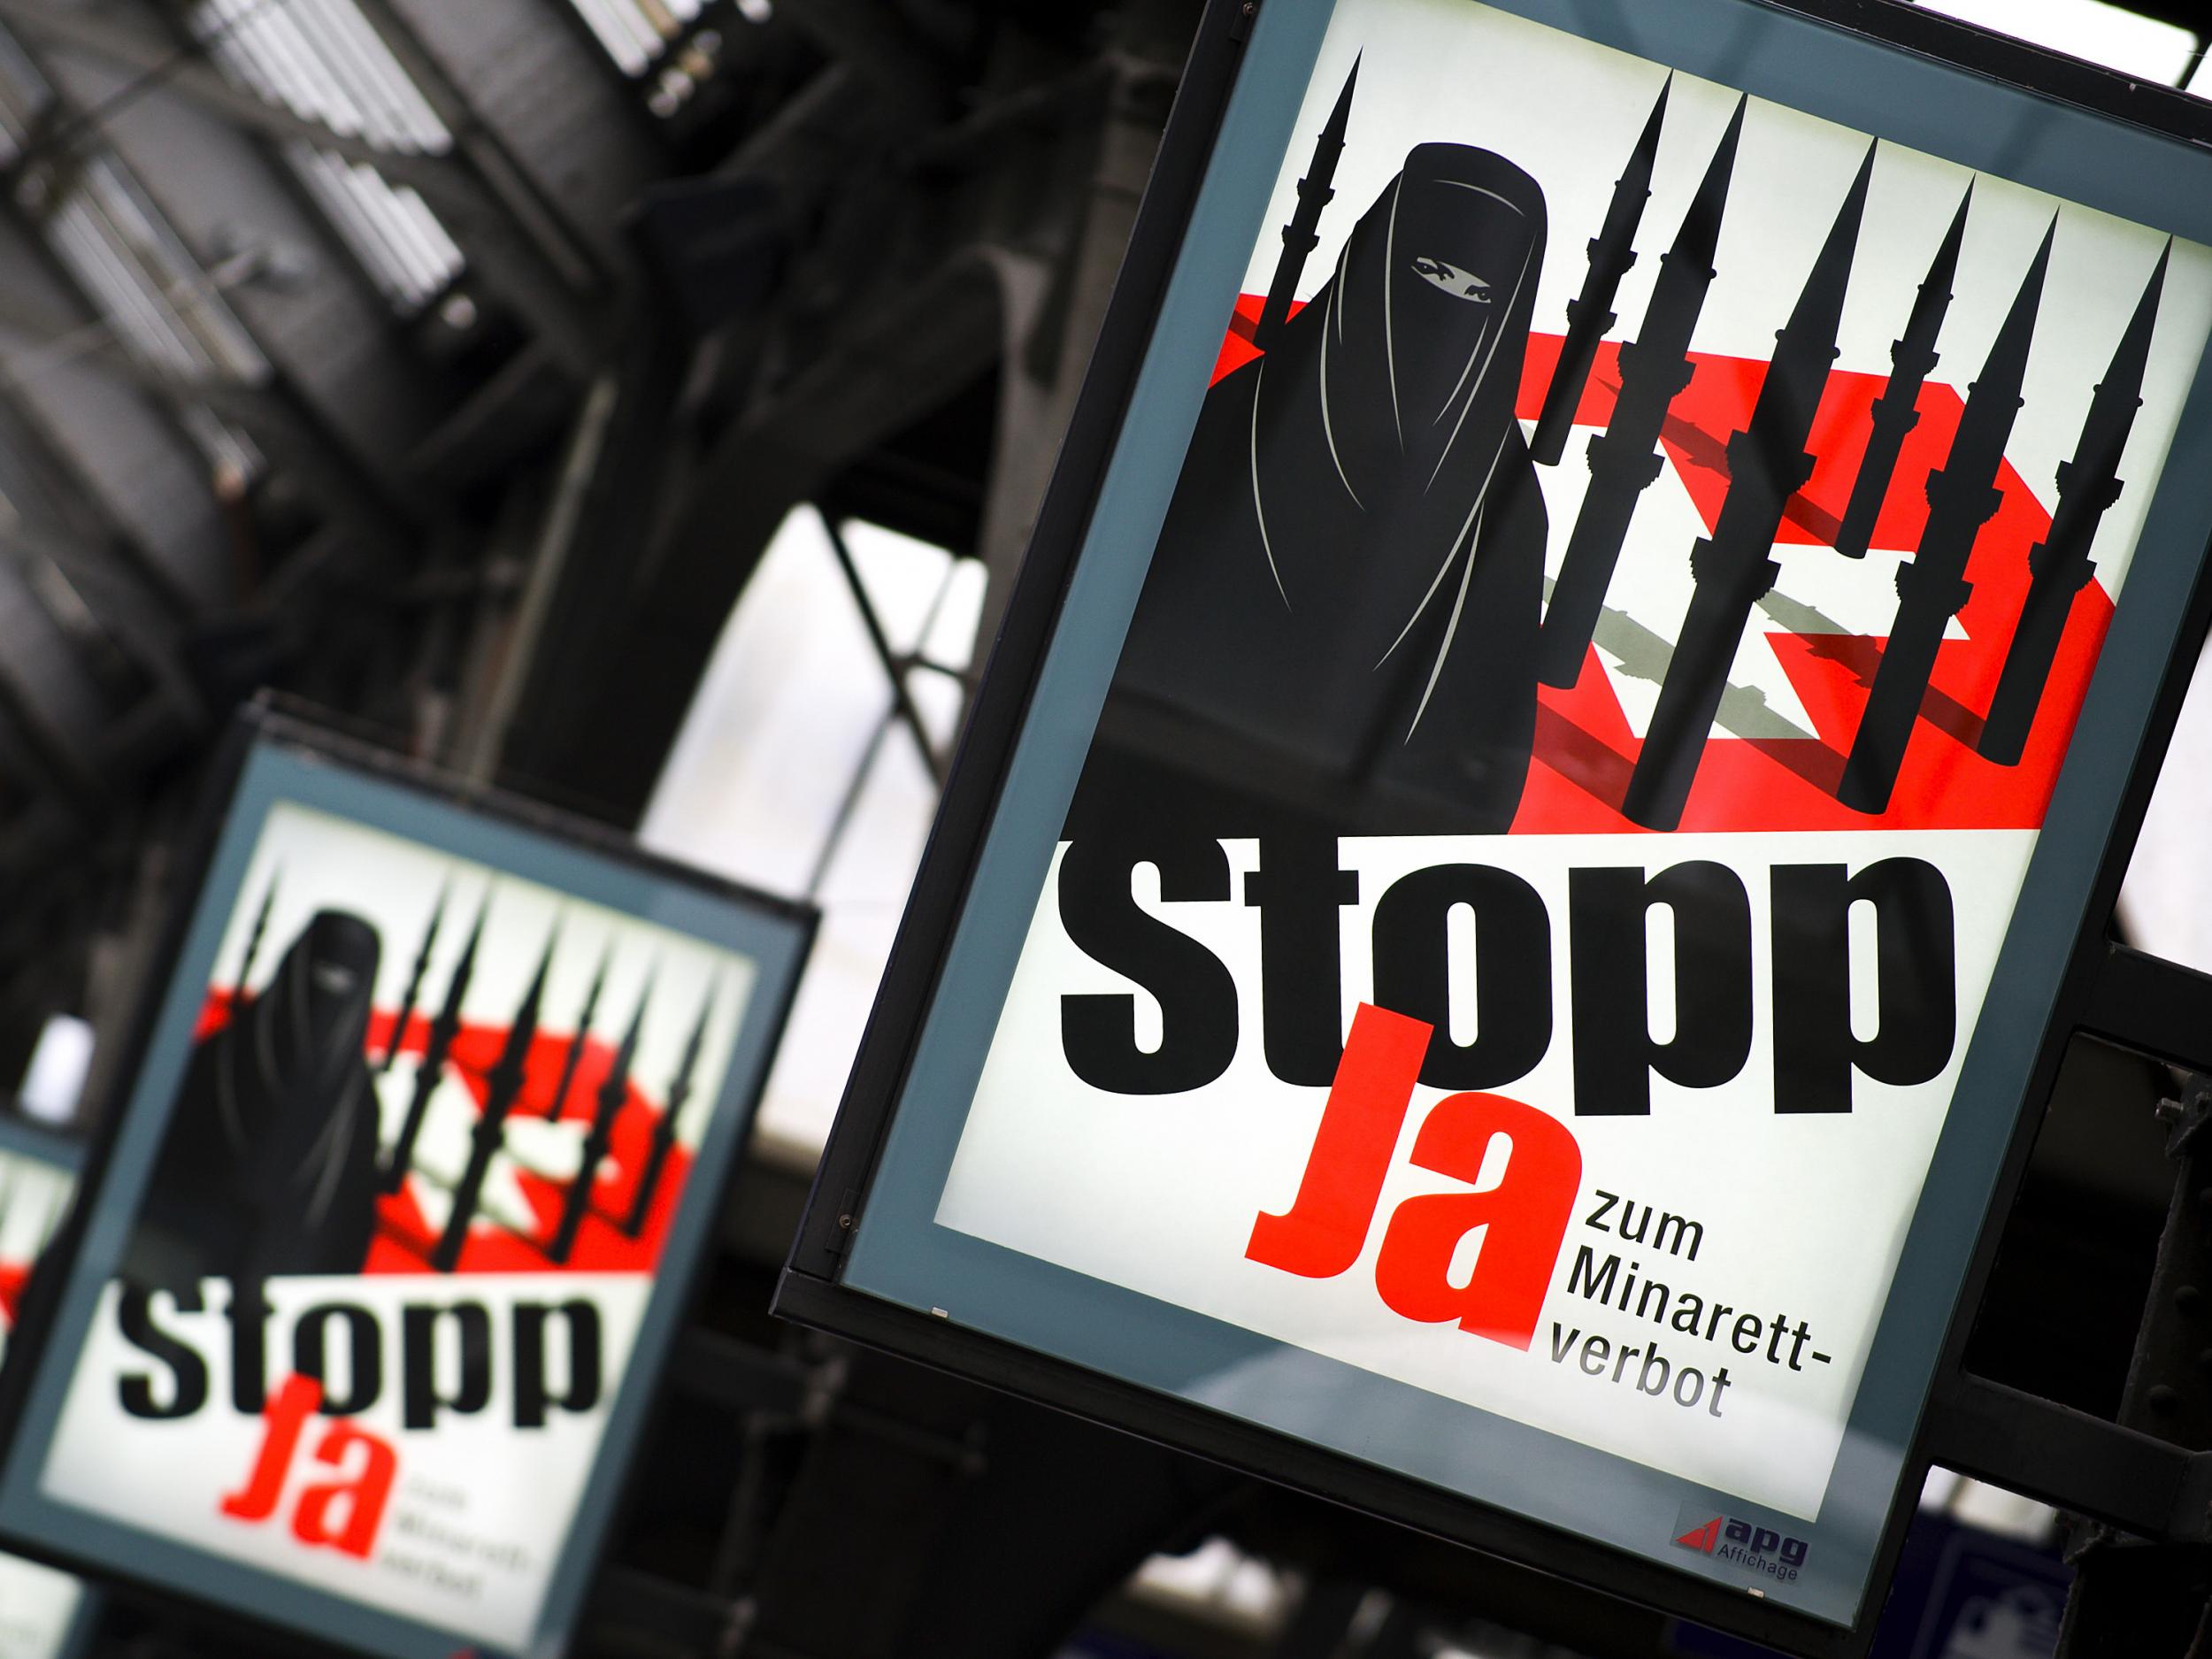 Posters in Switzerland supporting the burka ban from the far-right Swiss People's Party